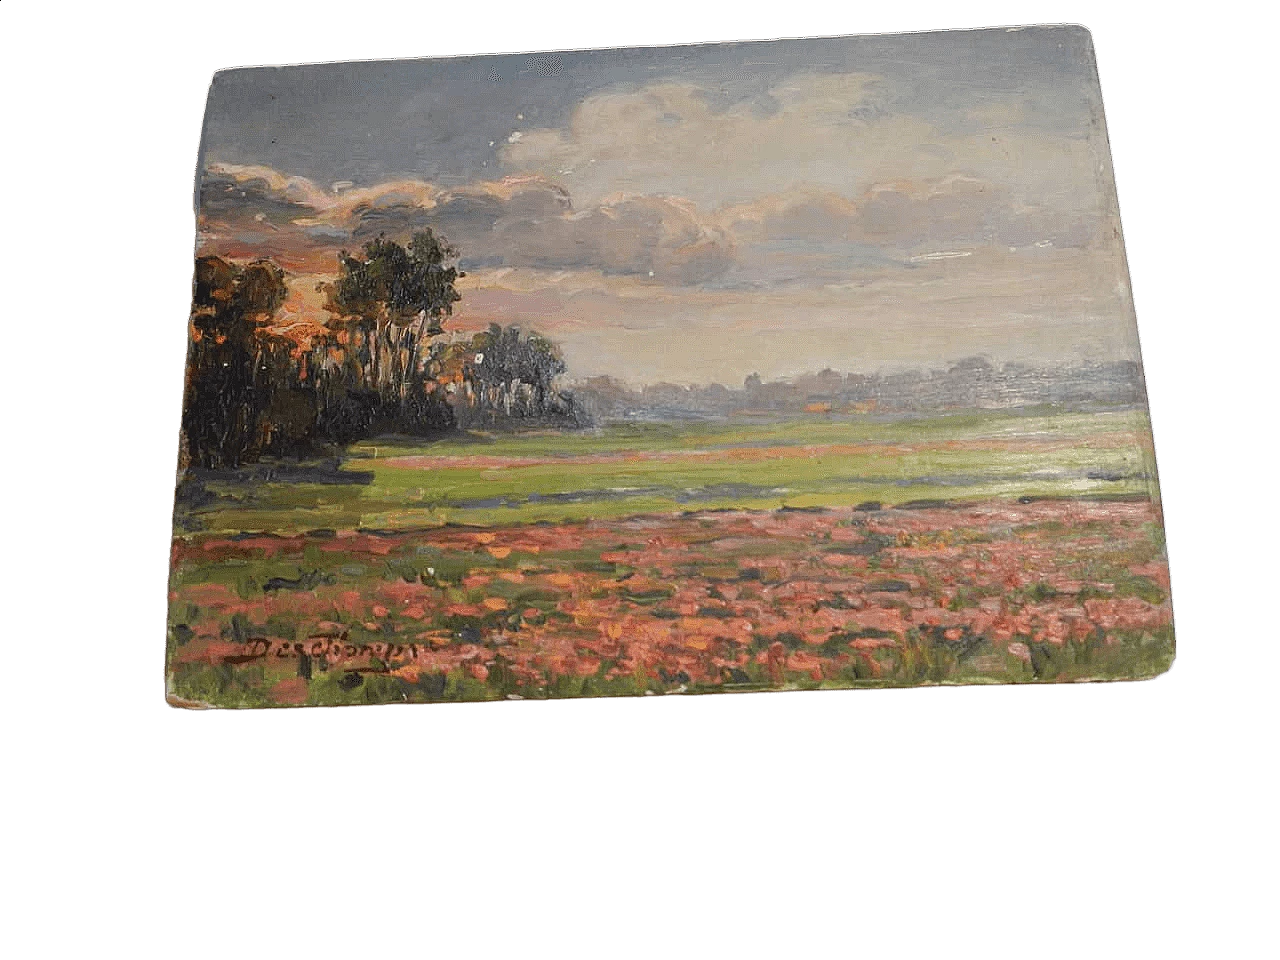 Des Champs, sunset on field, painting on wood, early 20th century 15